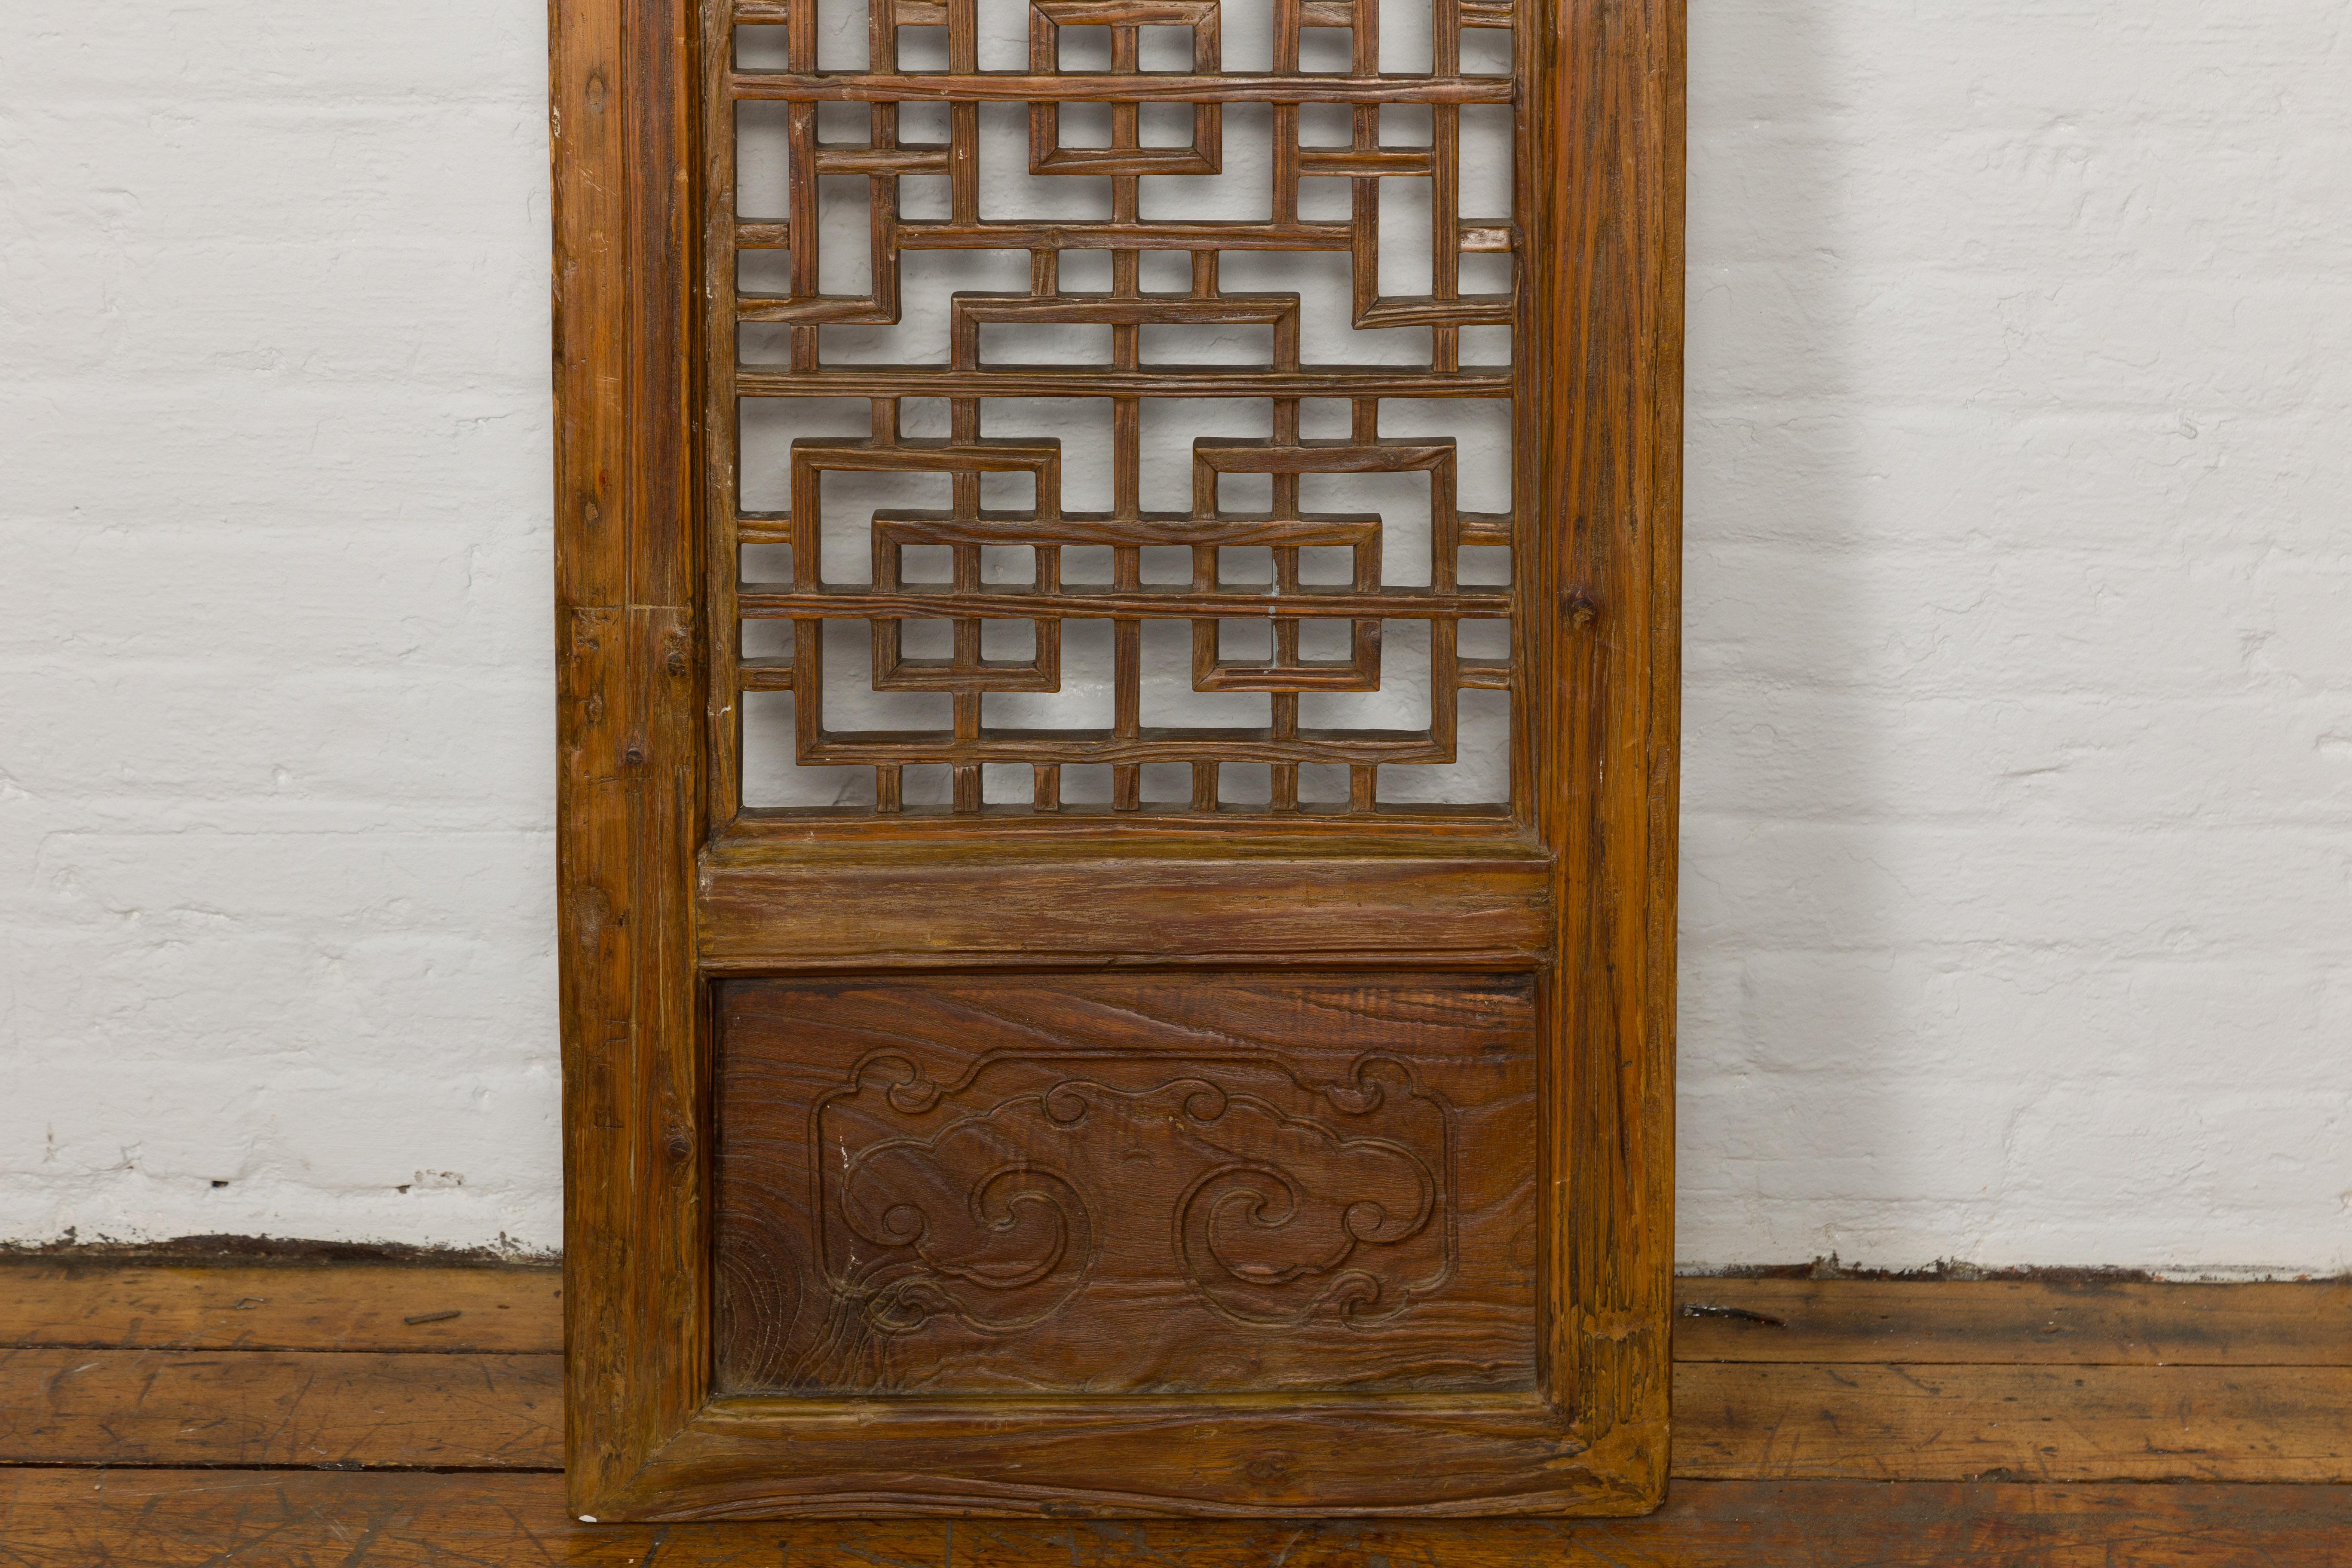 Chinese Qing Dynasty 19th Century Fretwork Screen with Carved Scrolling Motifs For Sale 6